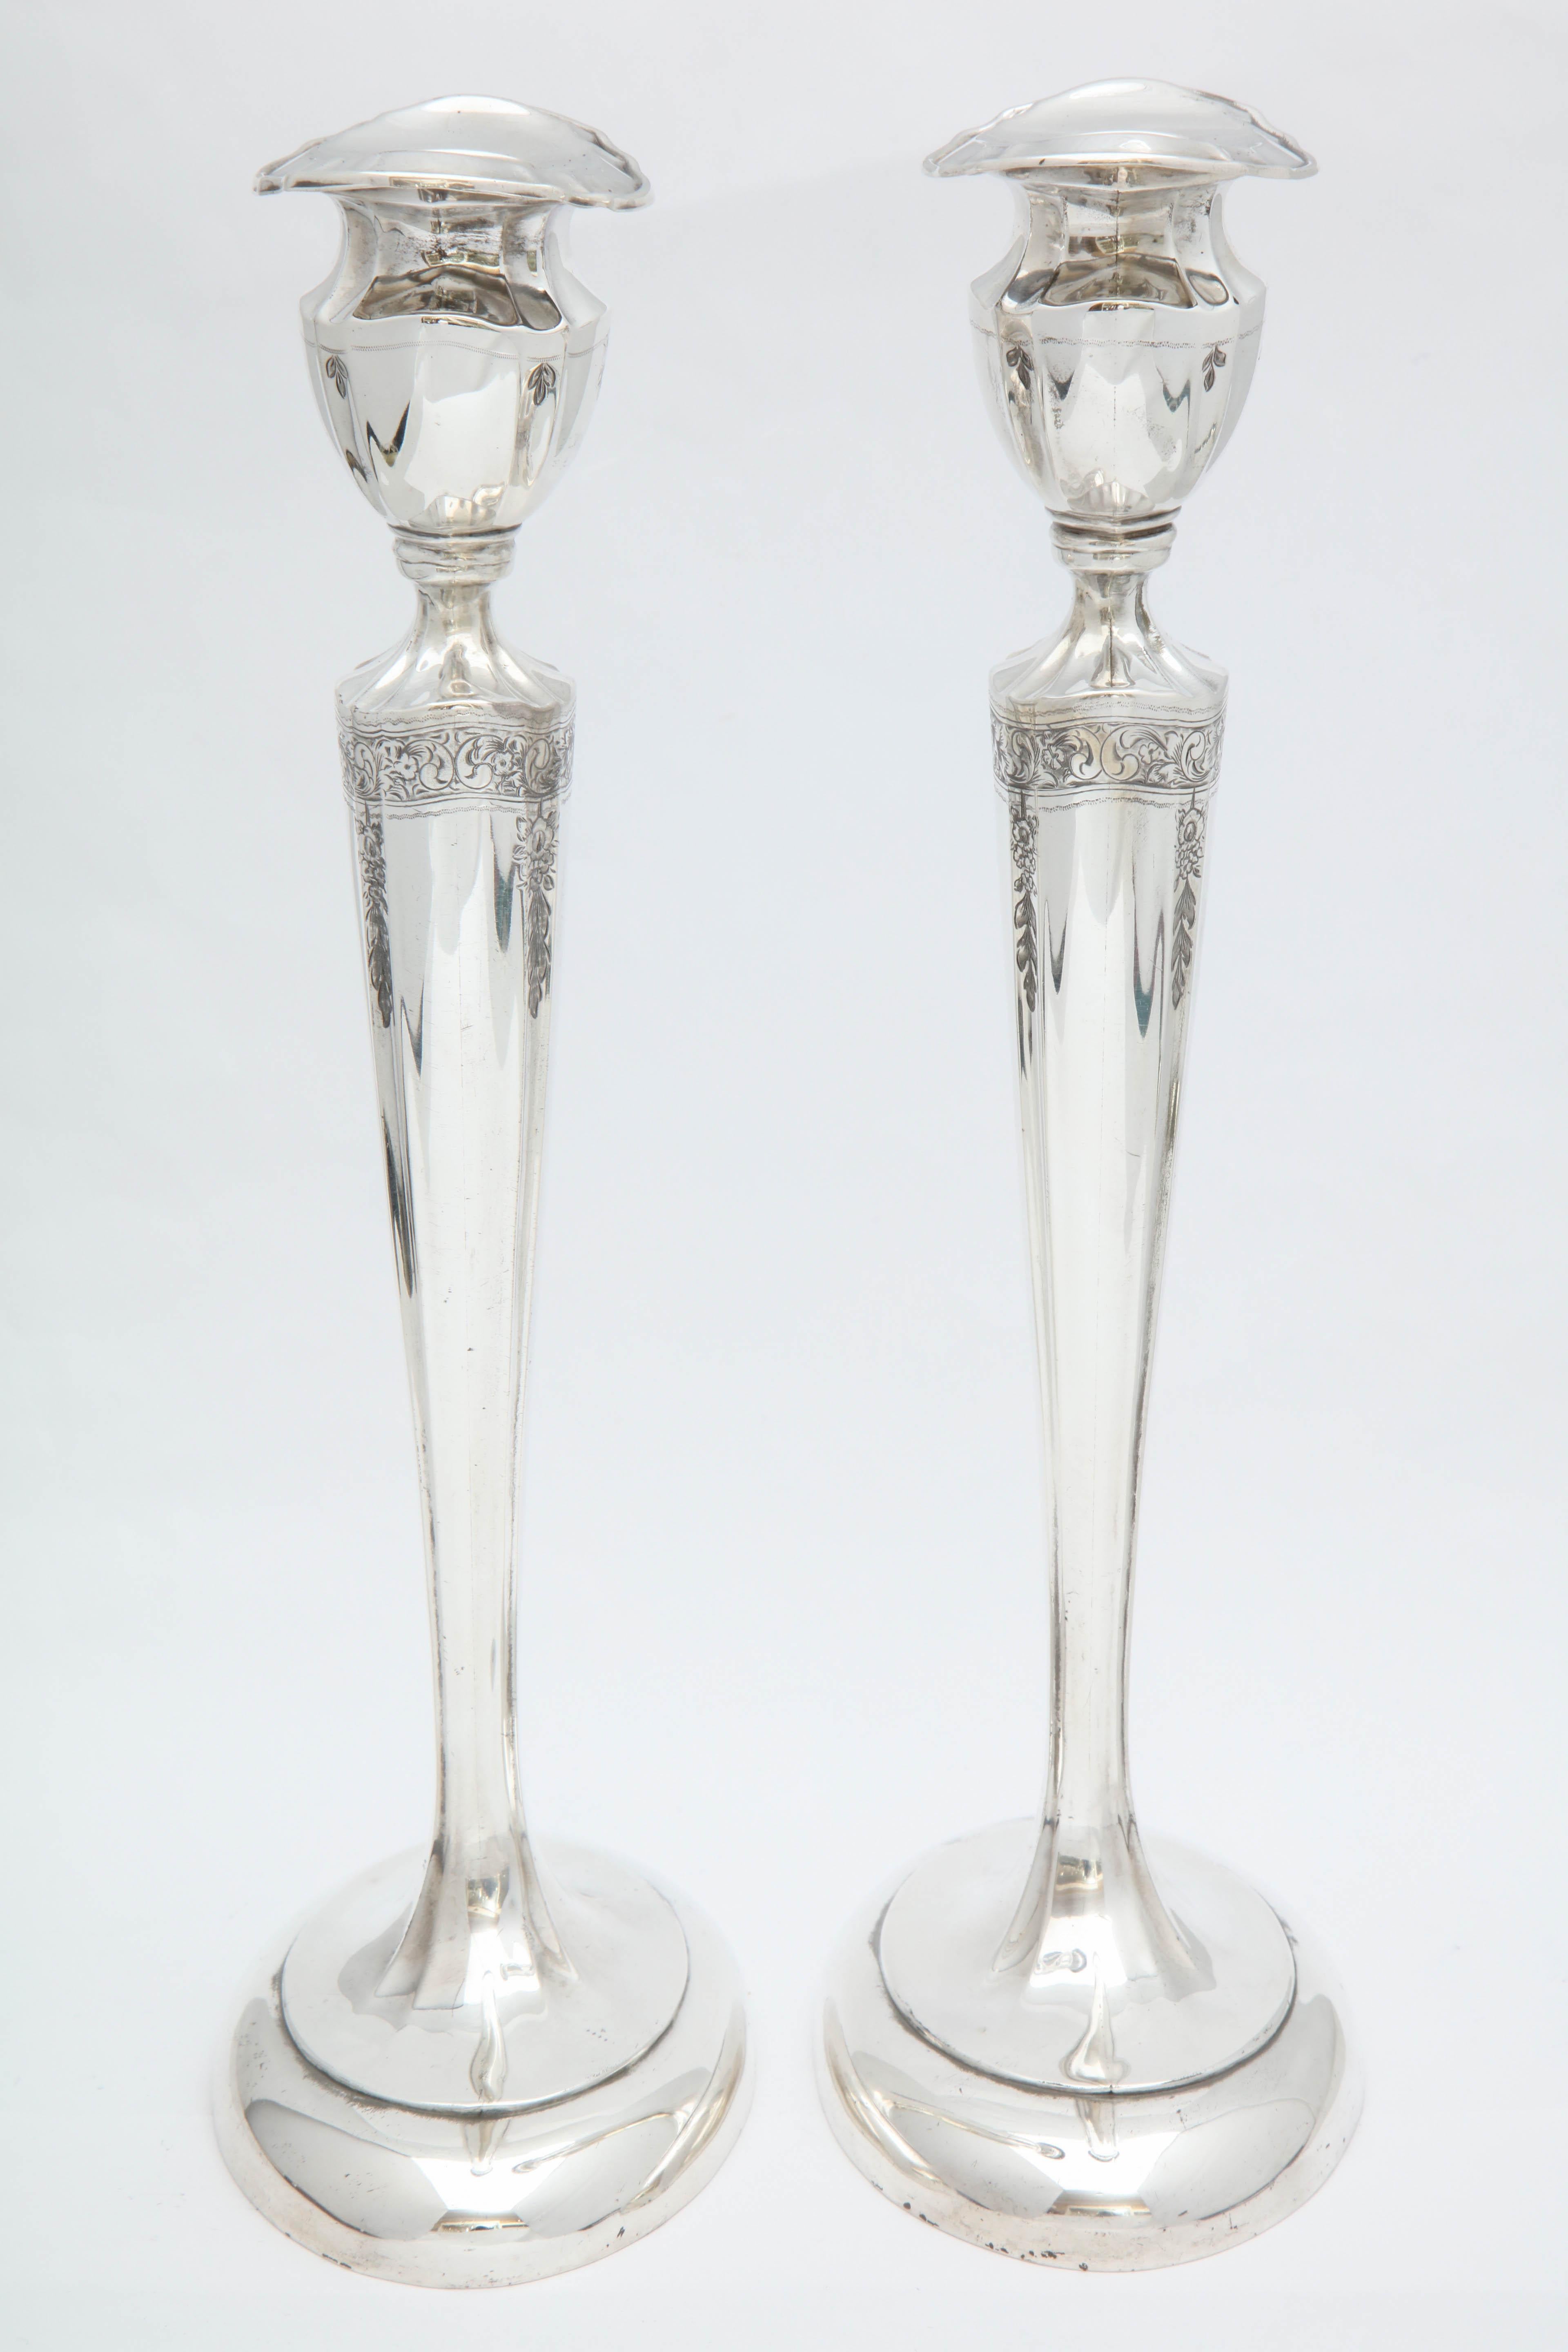 Graceful, tall pair of Art Nouveau, sterling silver candlesticks, Meriden Britannia Silver Co. (Division of International Silver Co.), Meriden, Connecticut, circa 1912. Lovely etched work. Pair measures 10 1/4 inches high x over 4 3/4 inches wide